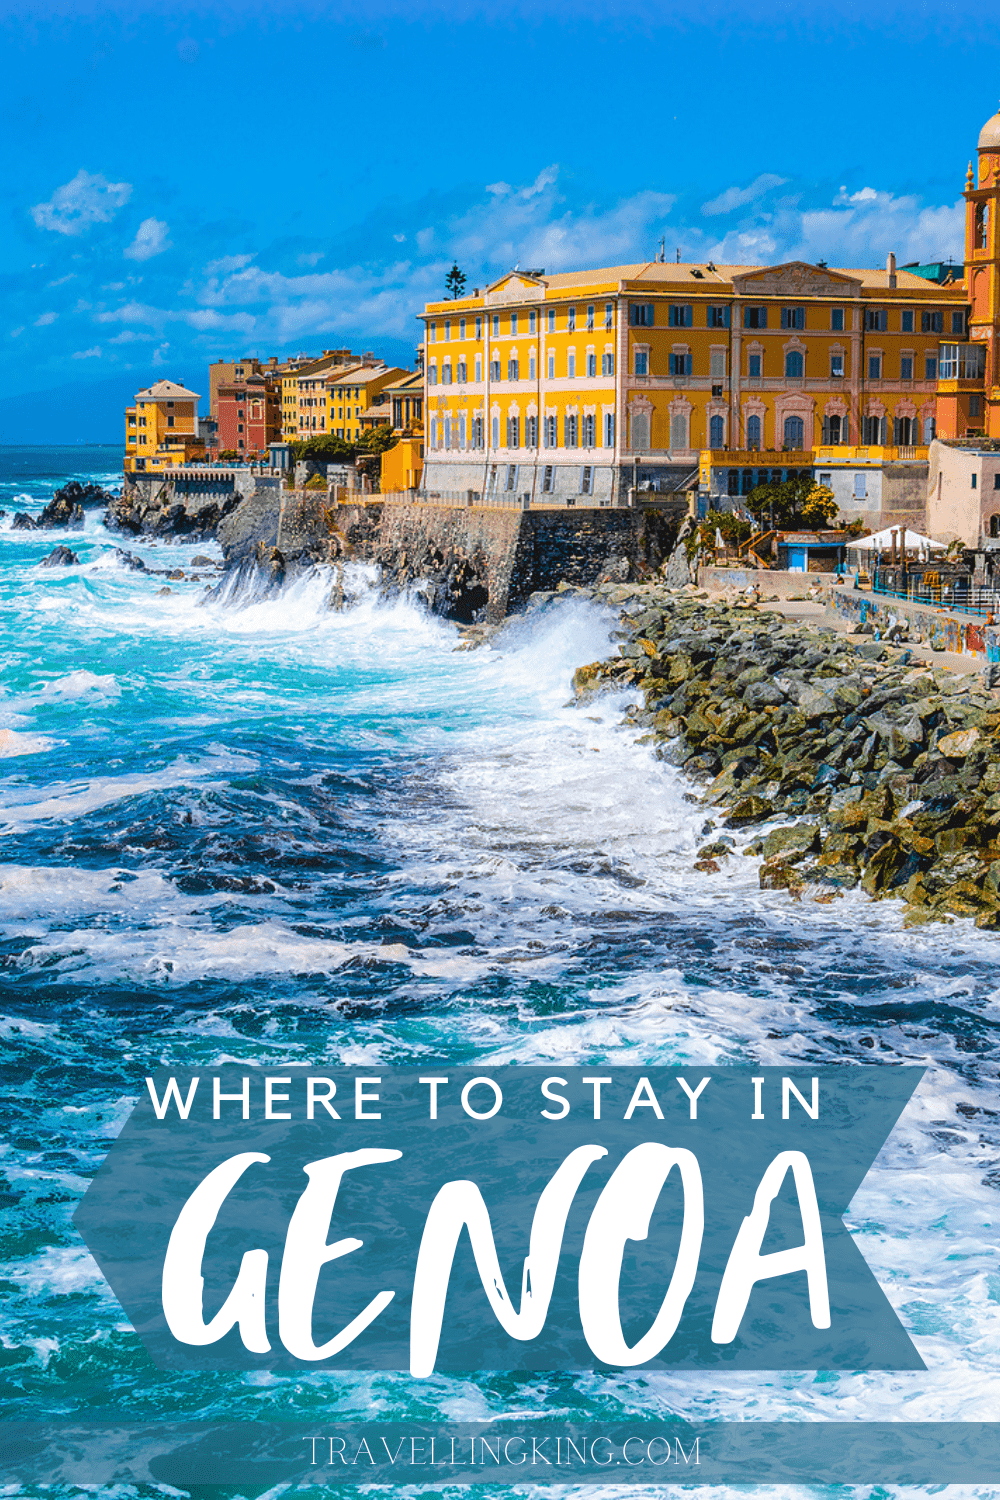 Where to stay in Genoa